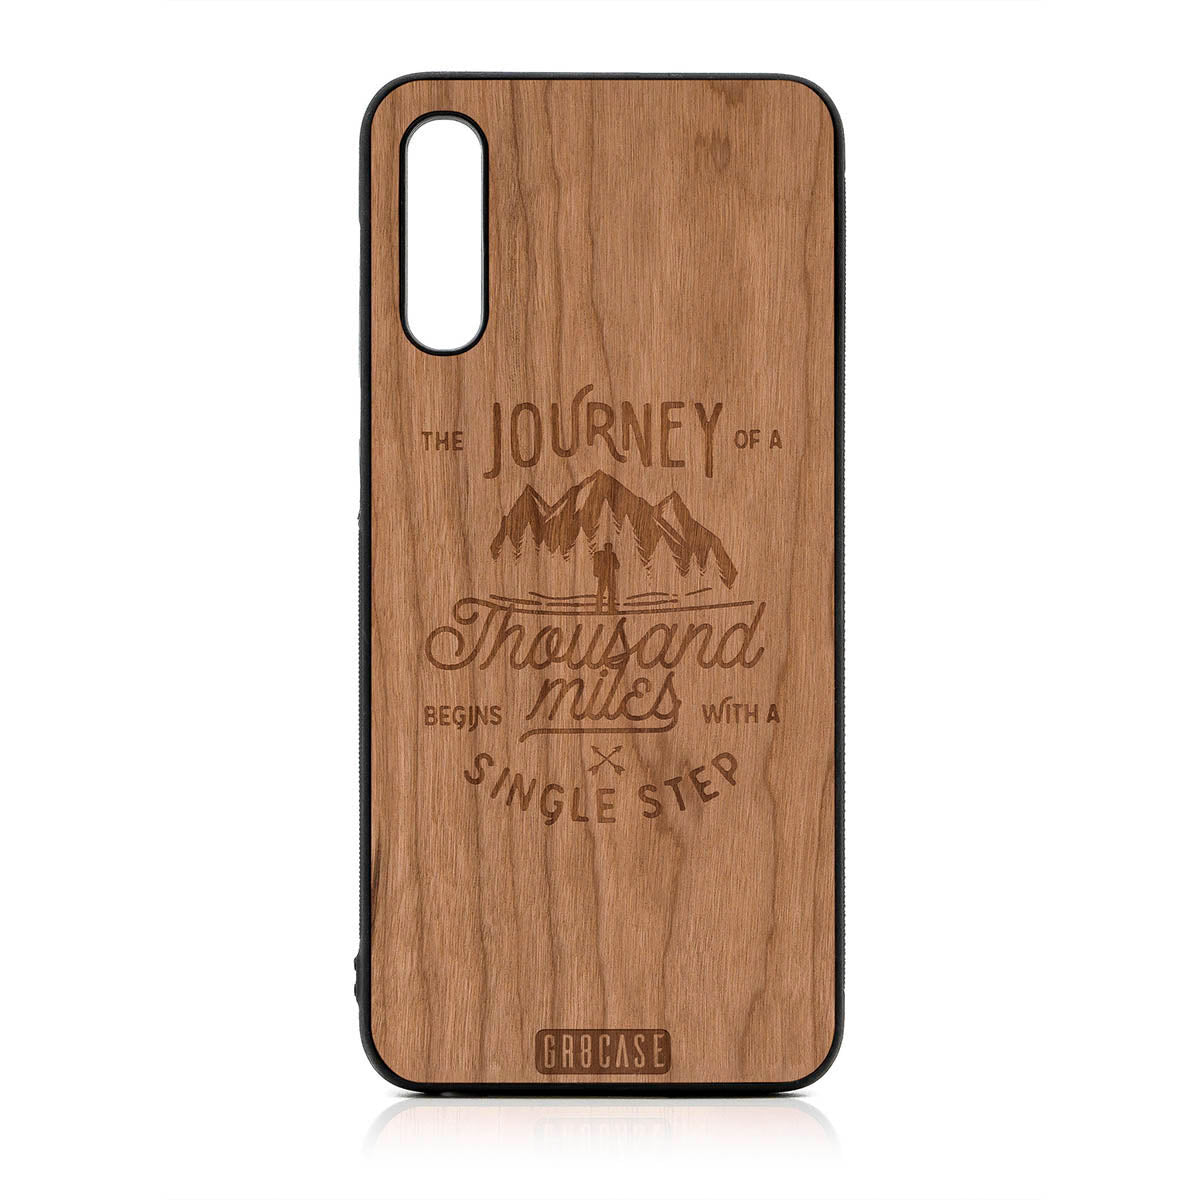 The Journey Of A Thousand Miles Begins With A Single Step Design Wood Case For Samsung Galaxy A50